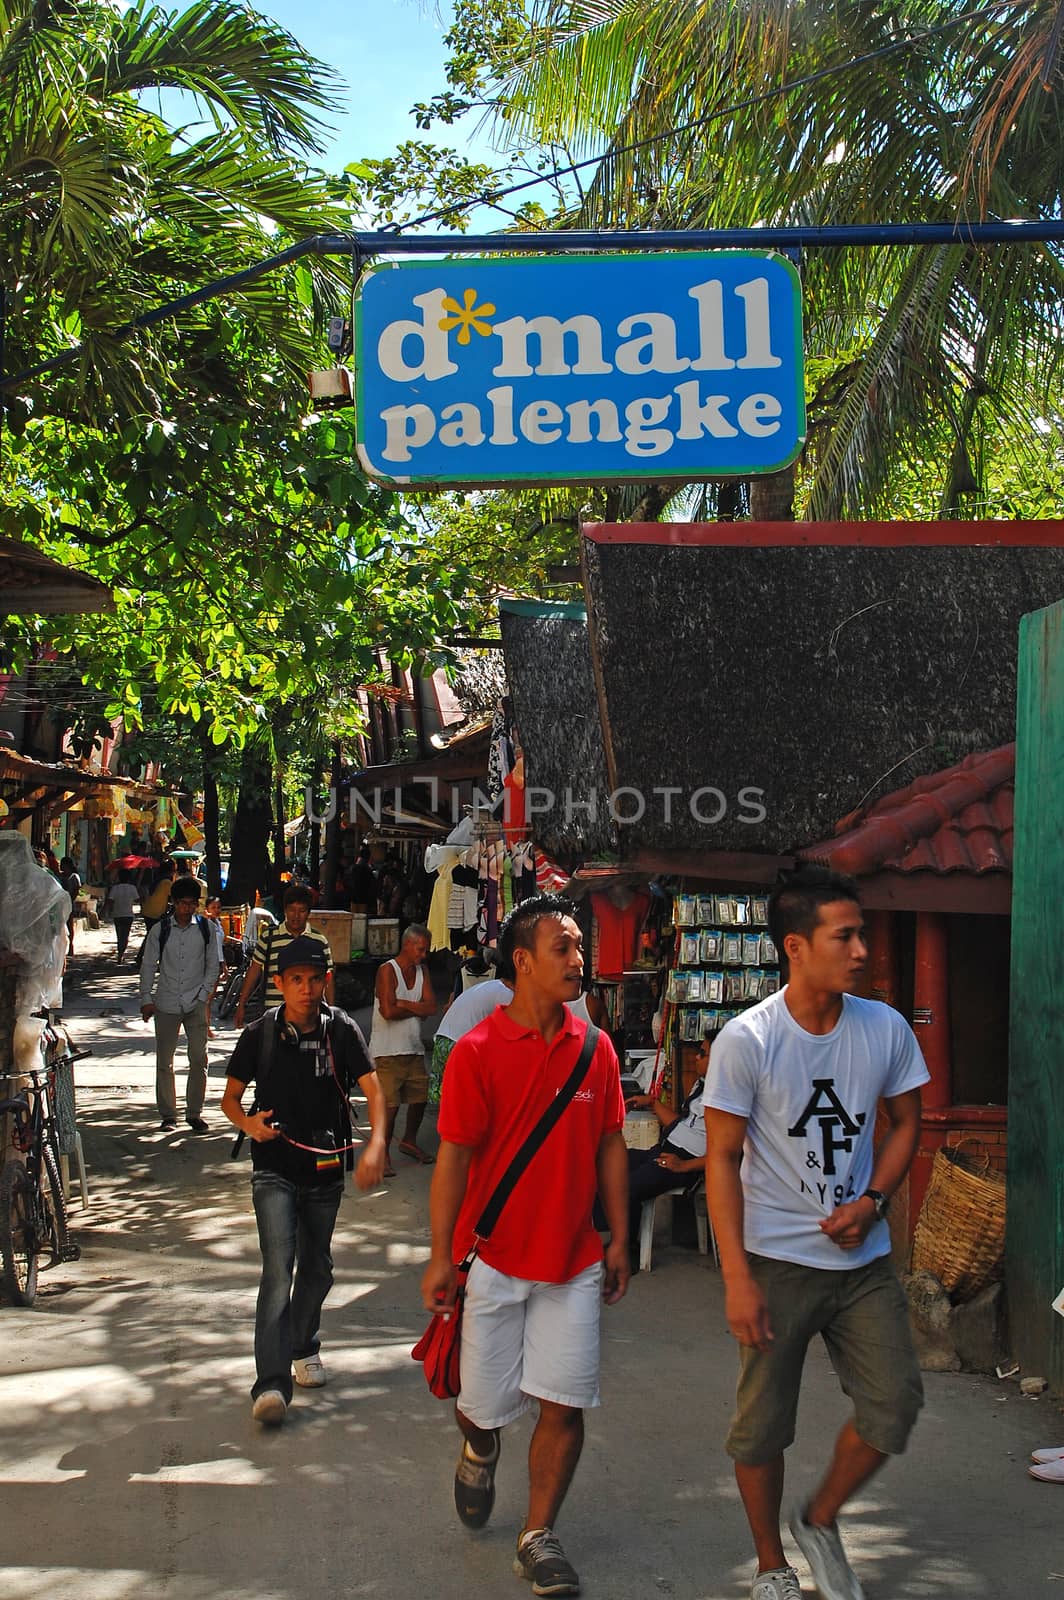 AKLAN, PH - SEPT 10 - Dmall open air mall pathway at Boracay Island on September 10, 2012 in Aklan, Philippines.